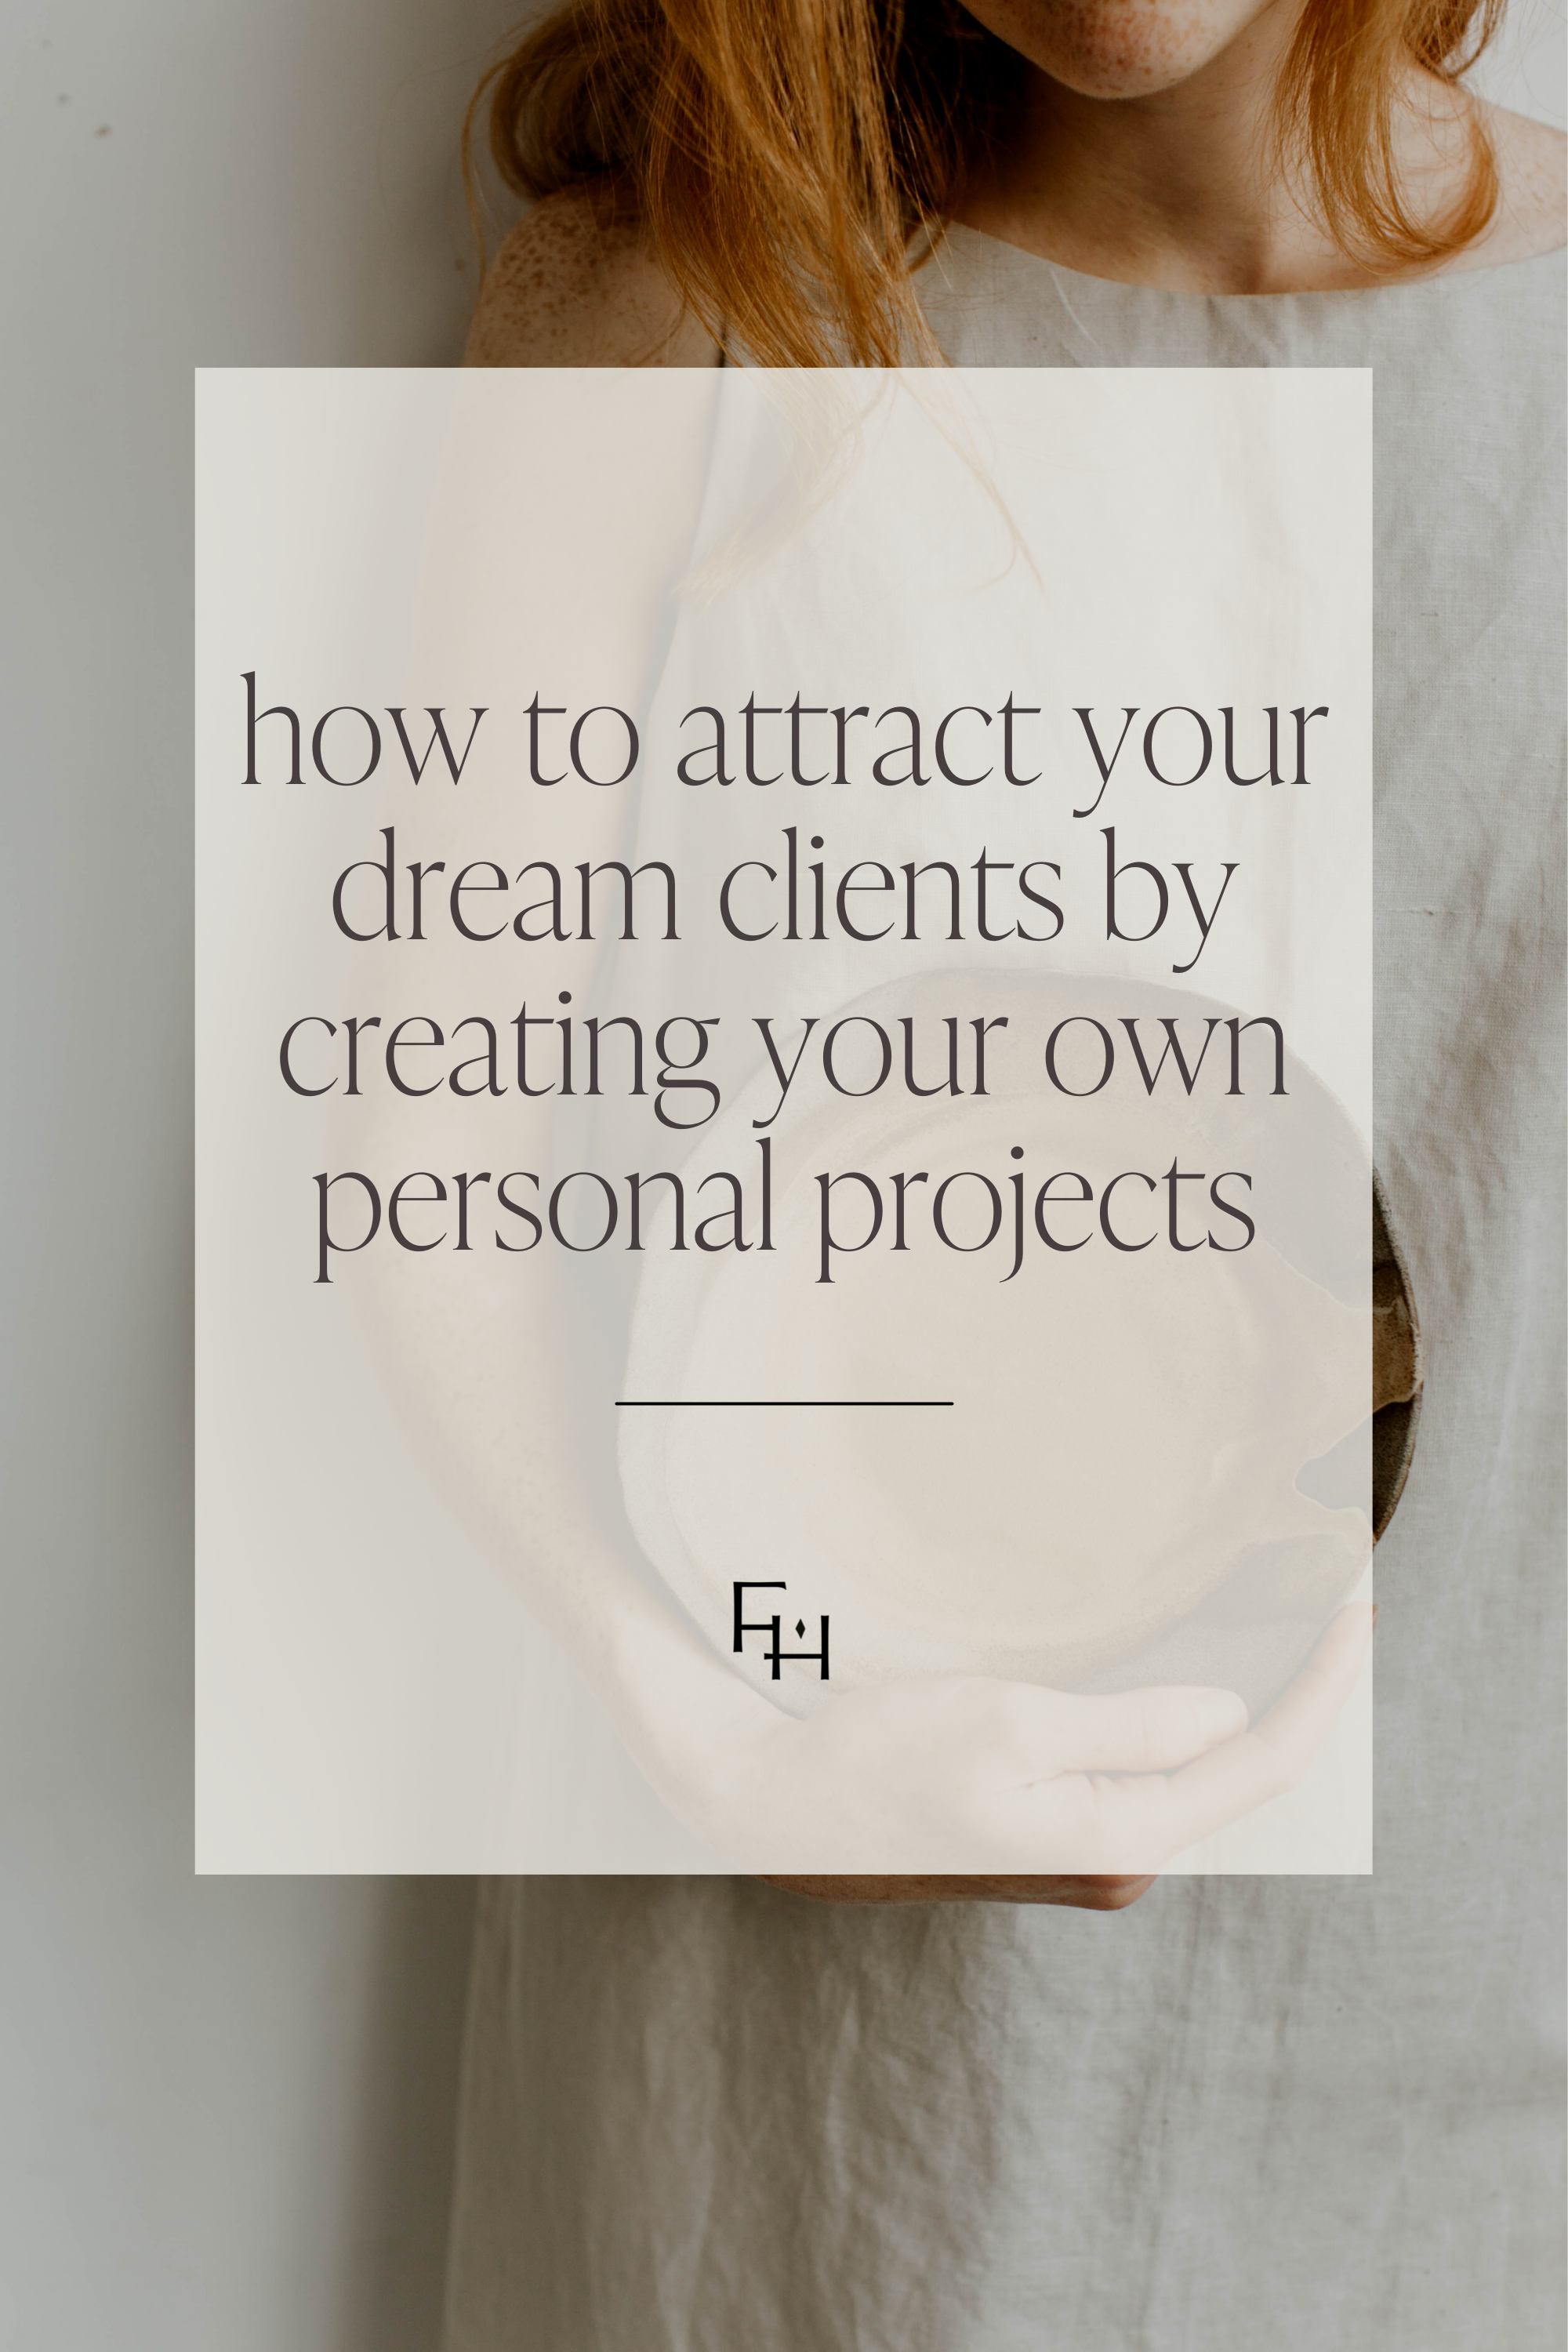 Attract your dream clients